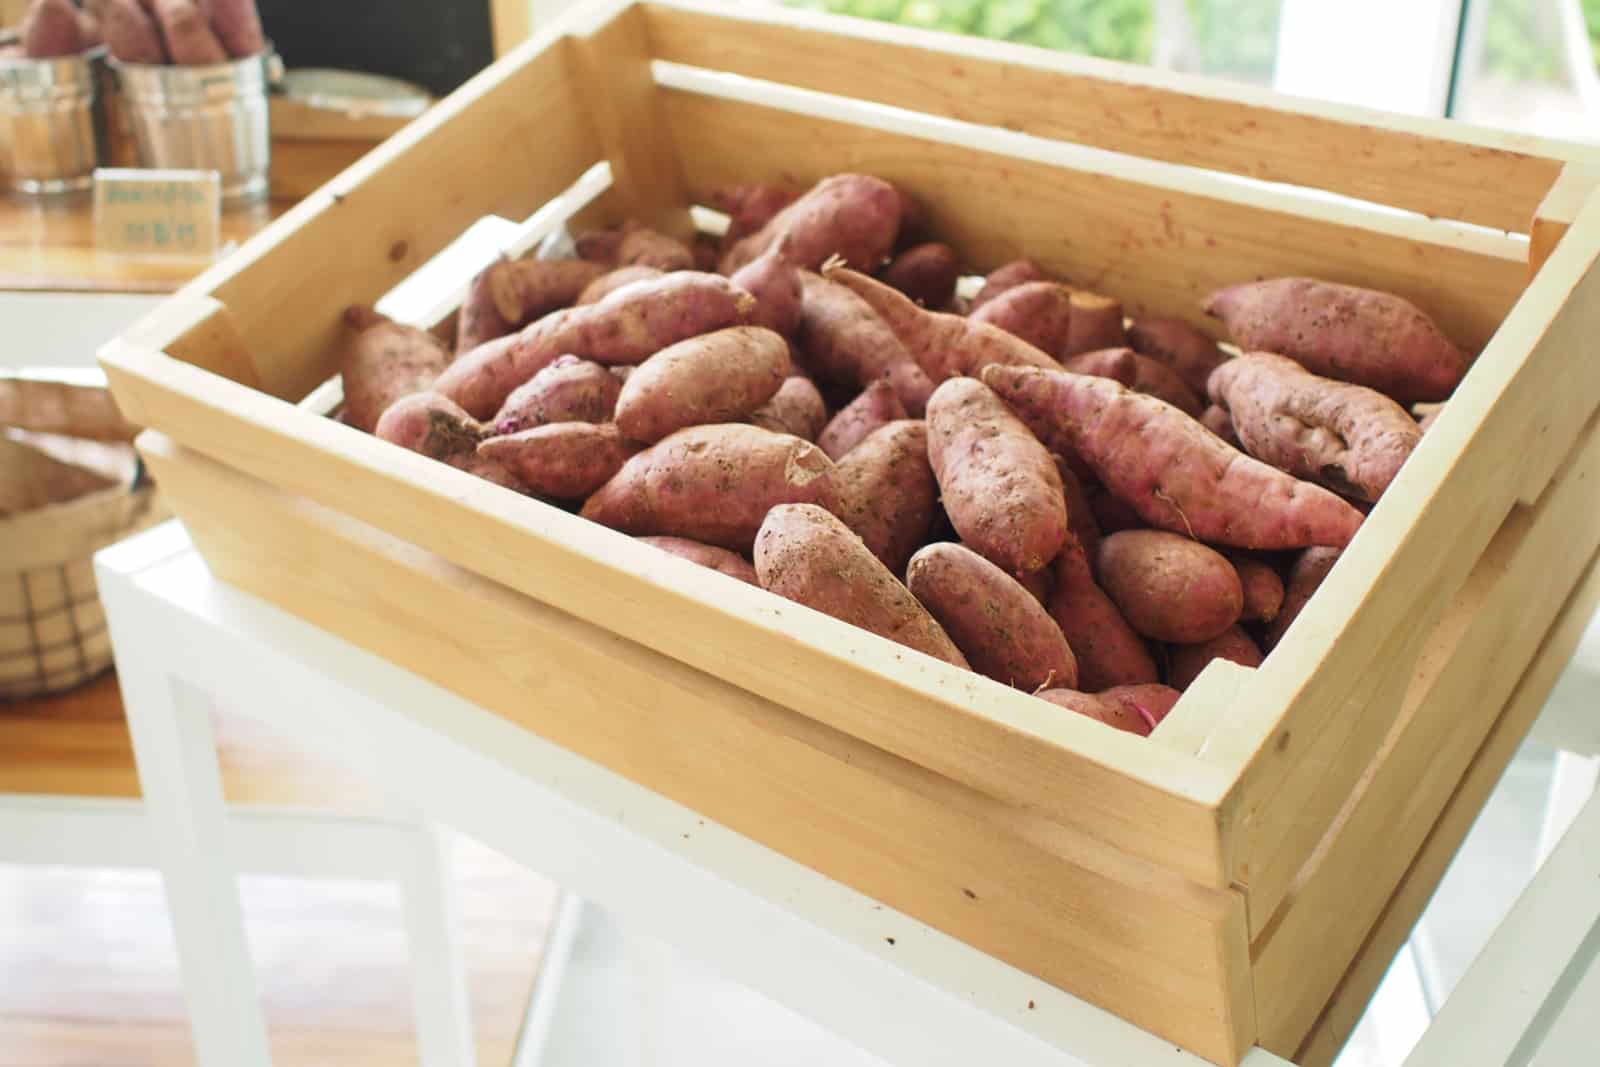 Many sweet potatoes in the wooden crate